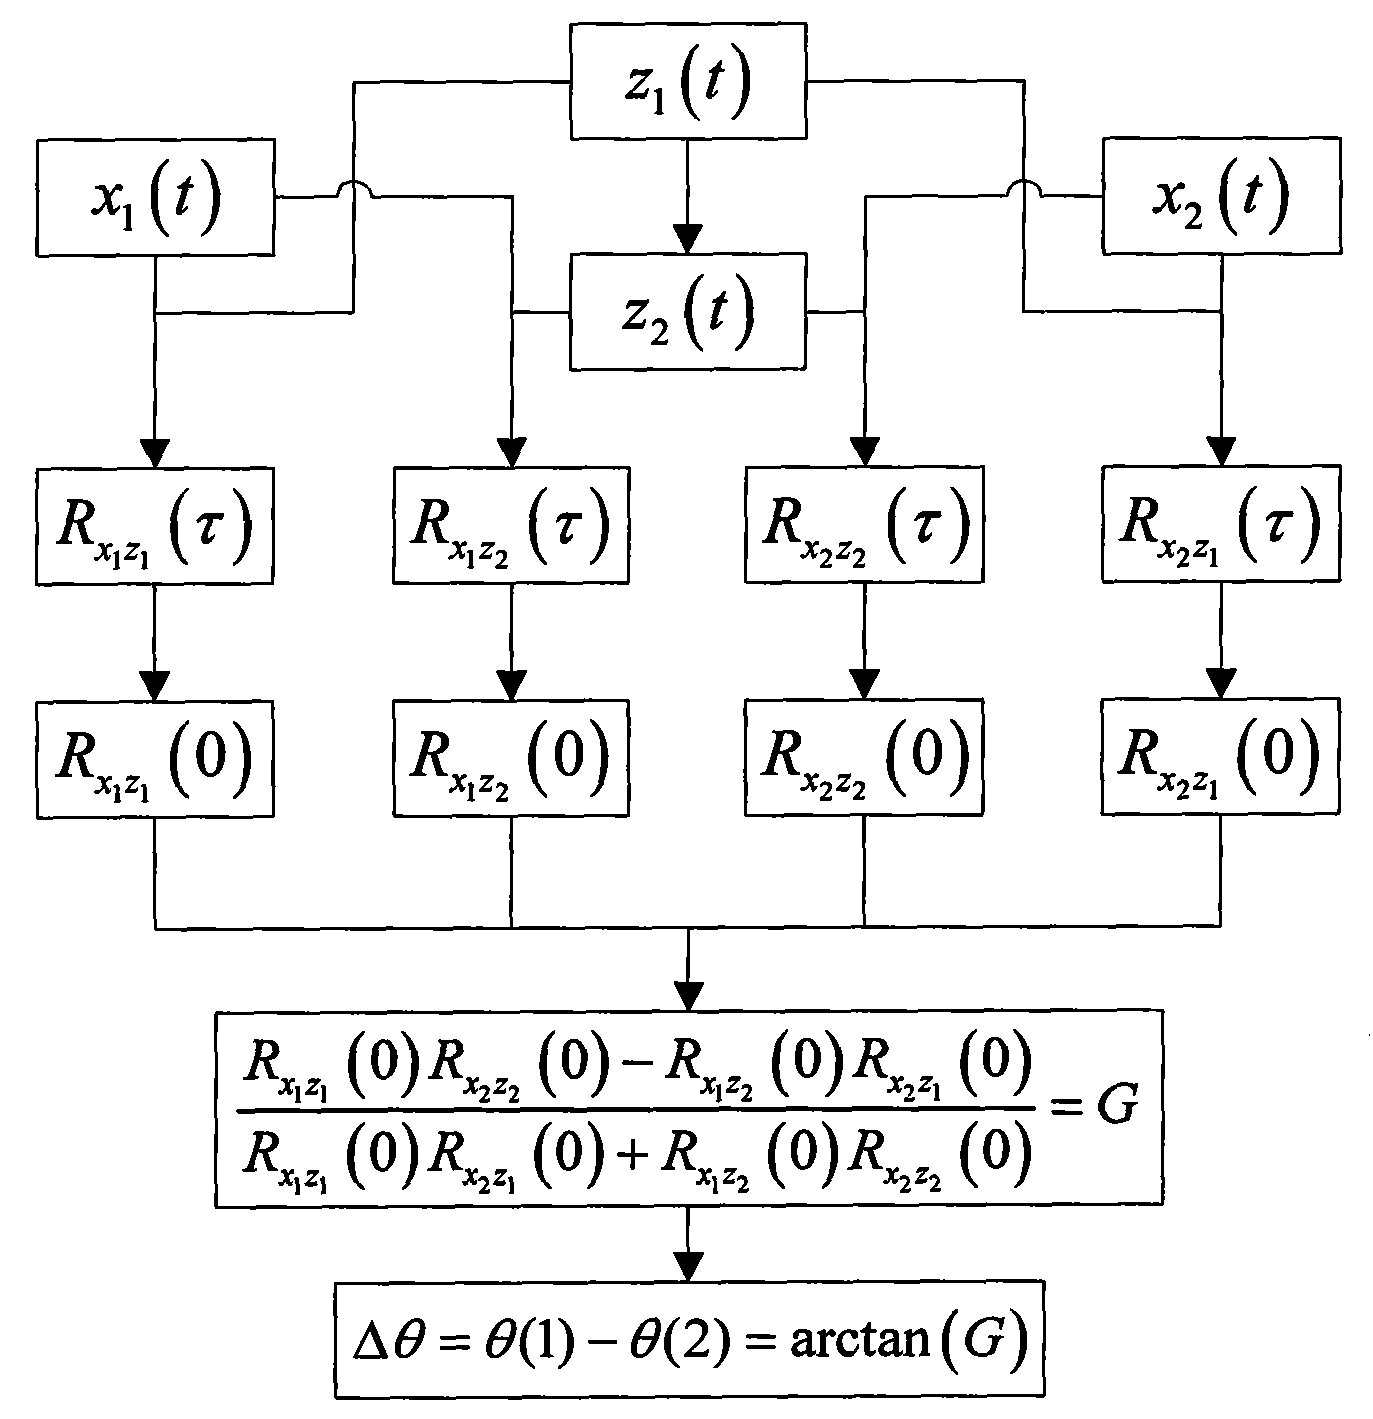 Method for mutual correlation phase difference measurement based on Hilbert transform